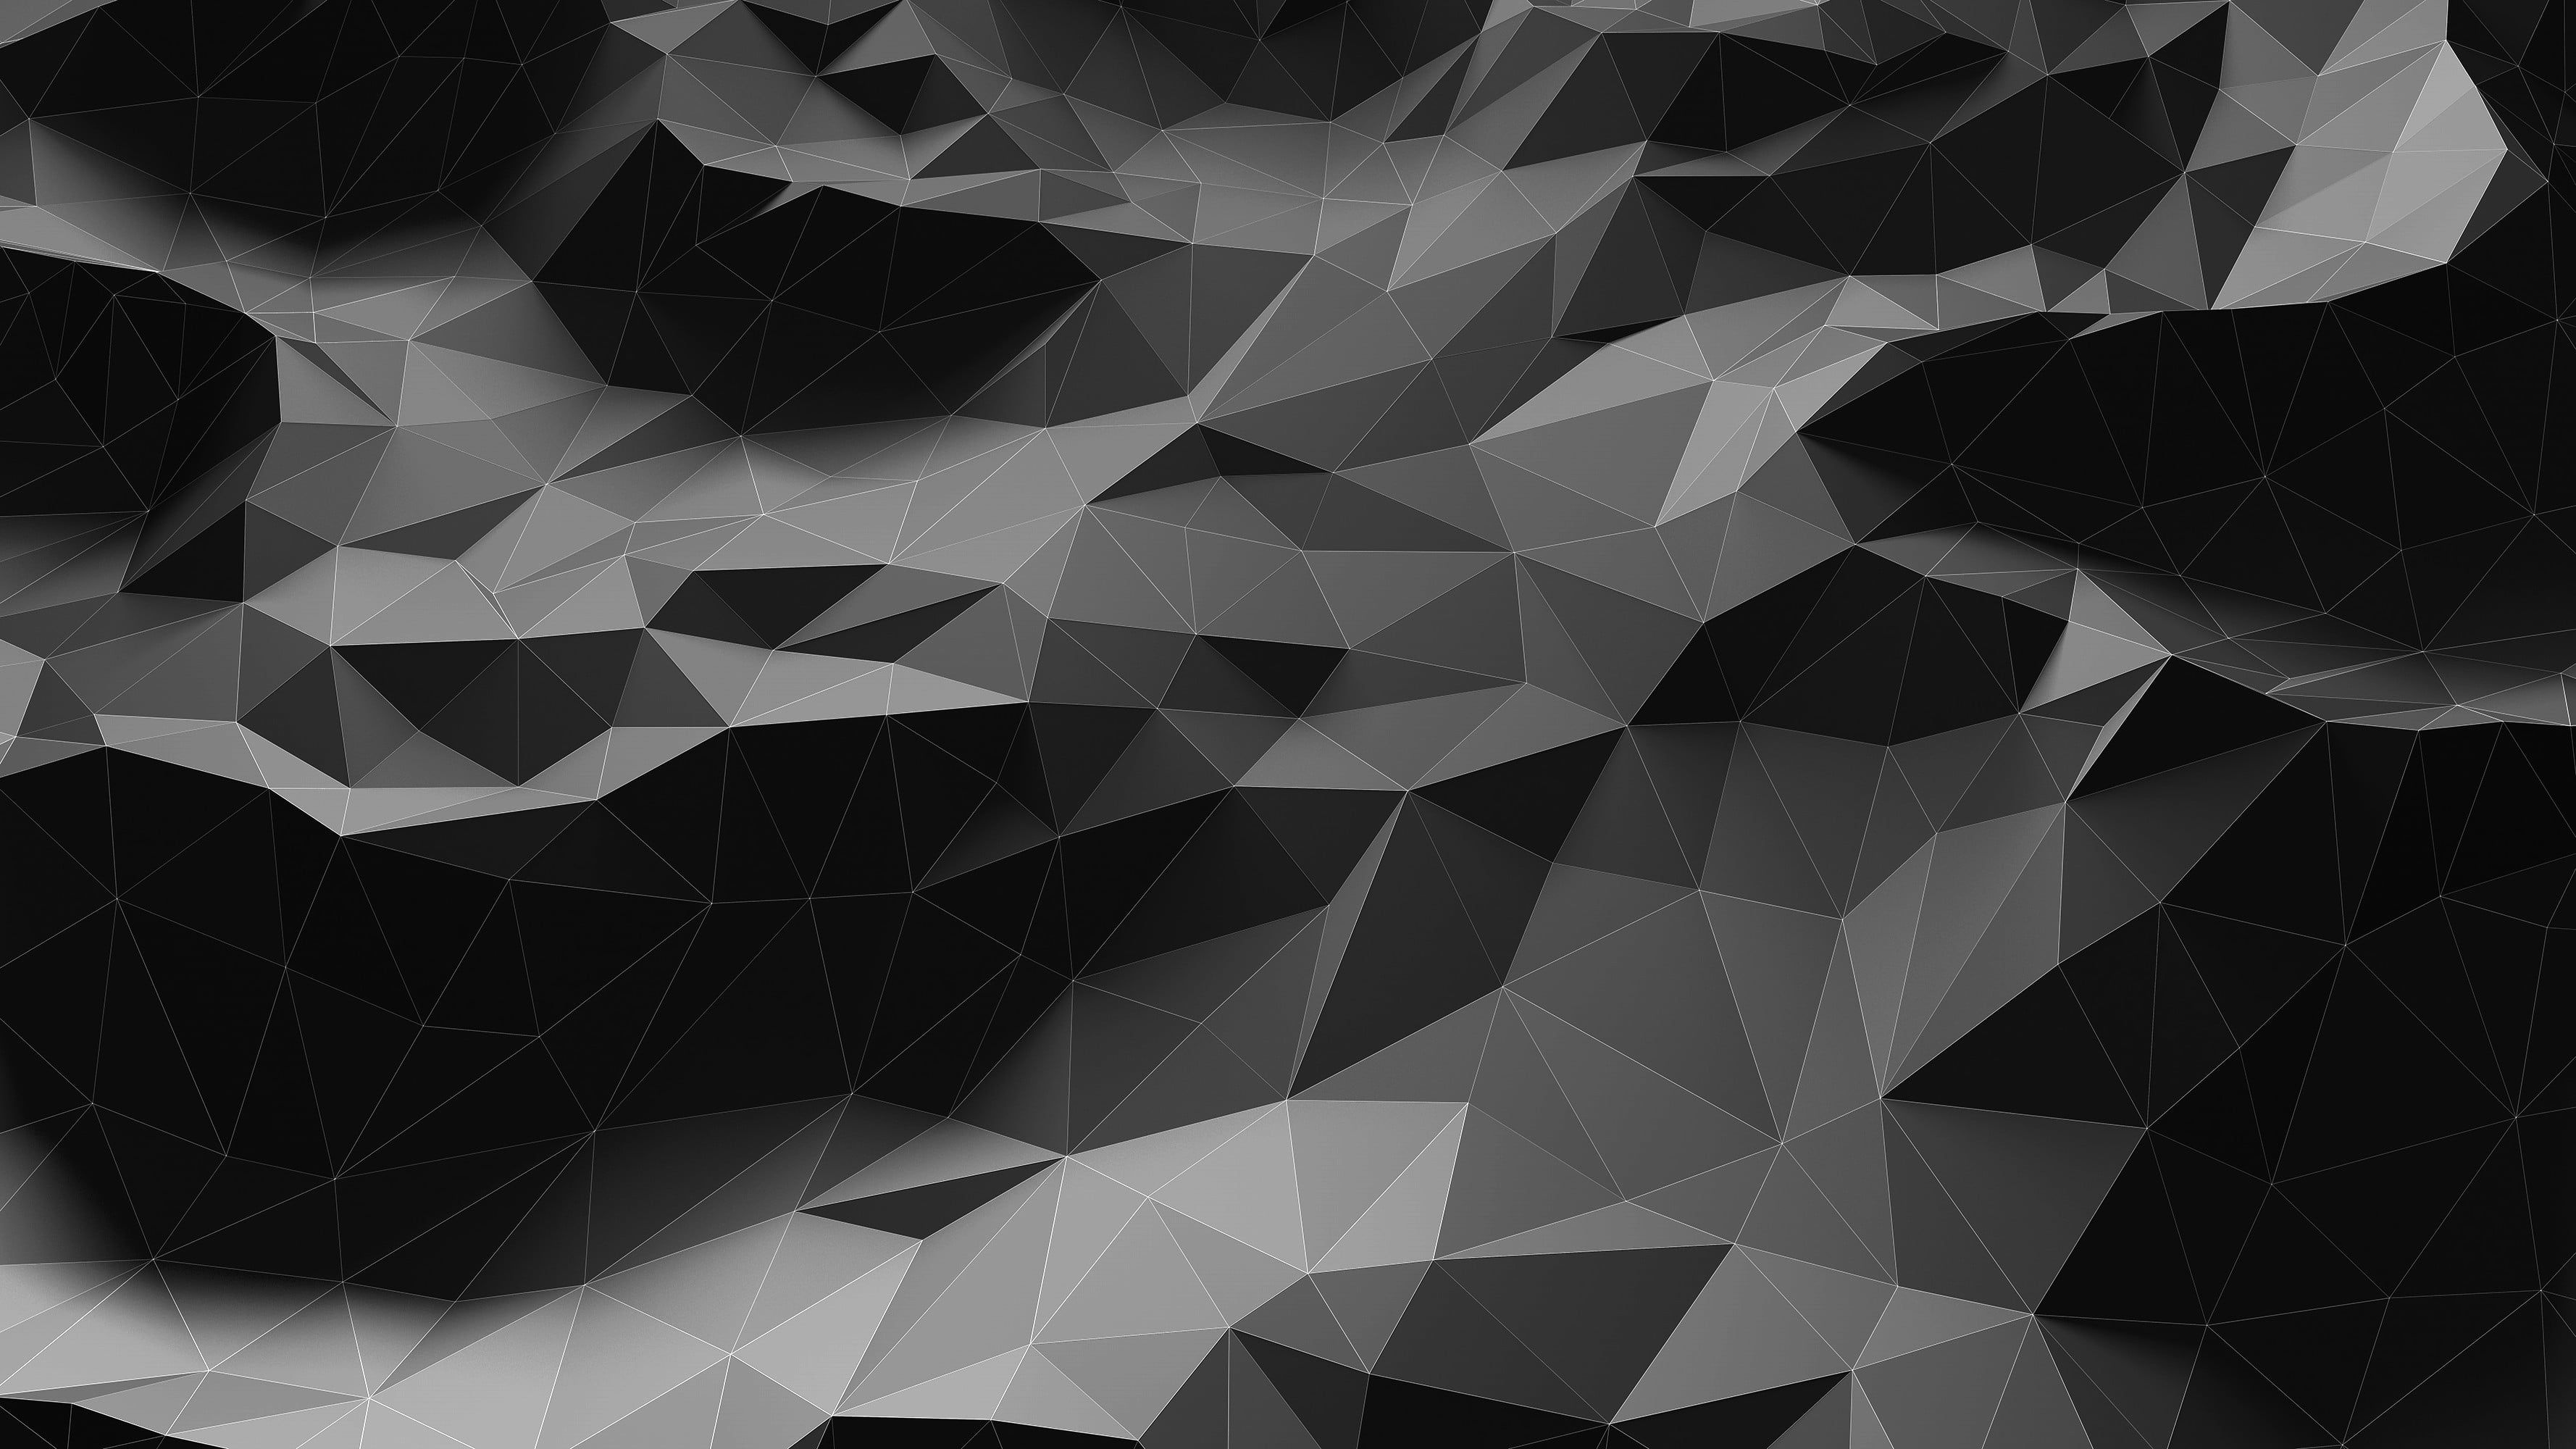 black and gray cubist painting low poly #triangle D K #wallpaper #hdwallpaper #desktop. Cubist paintings, Wallpaper, Illustration